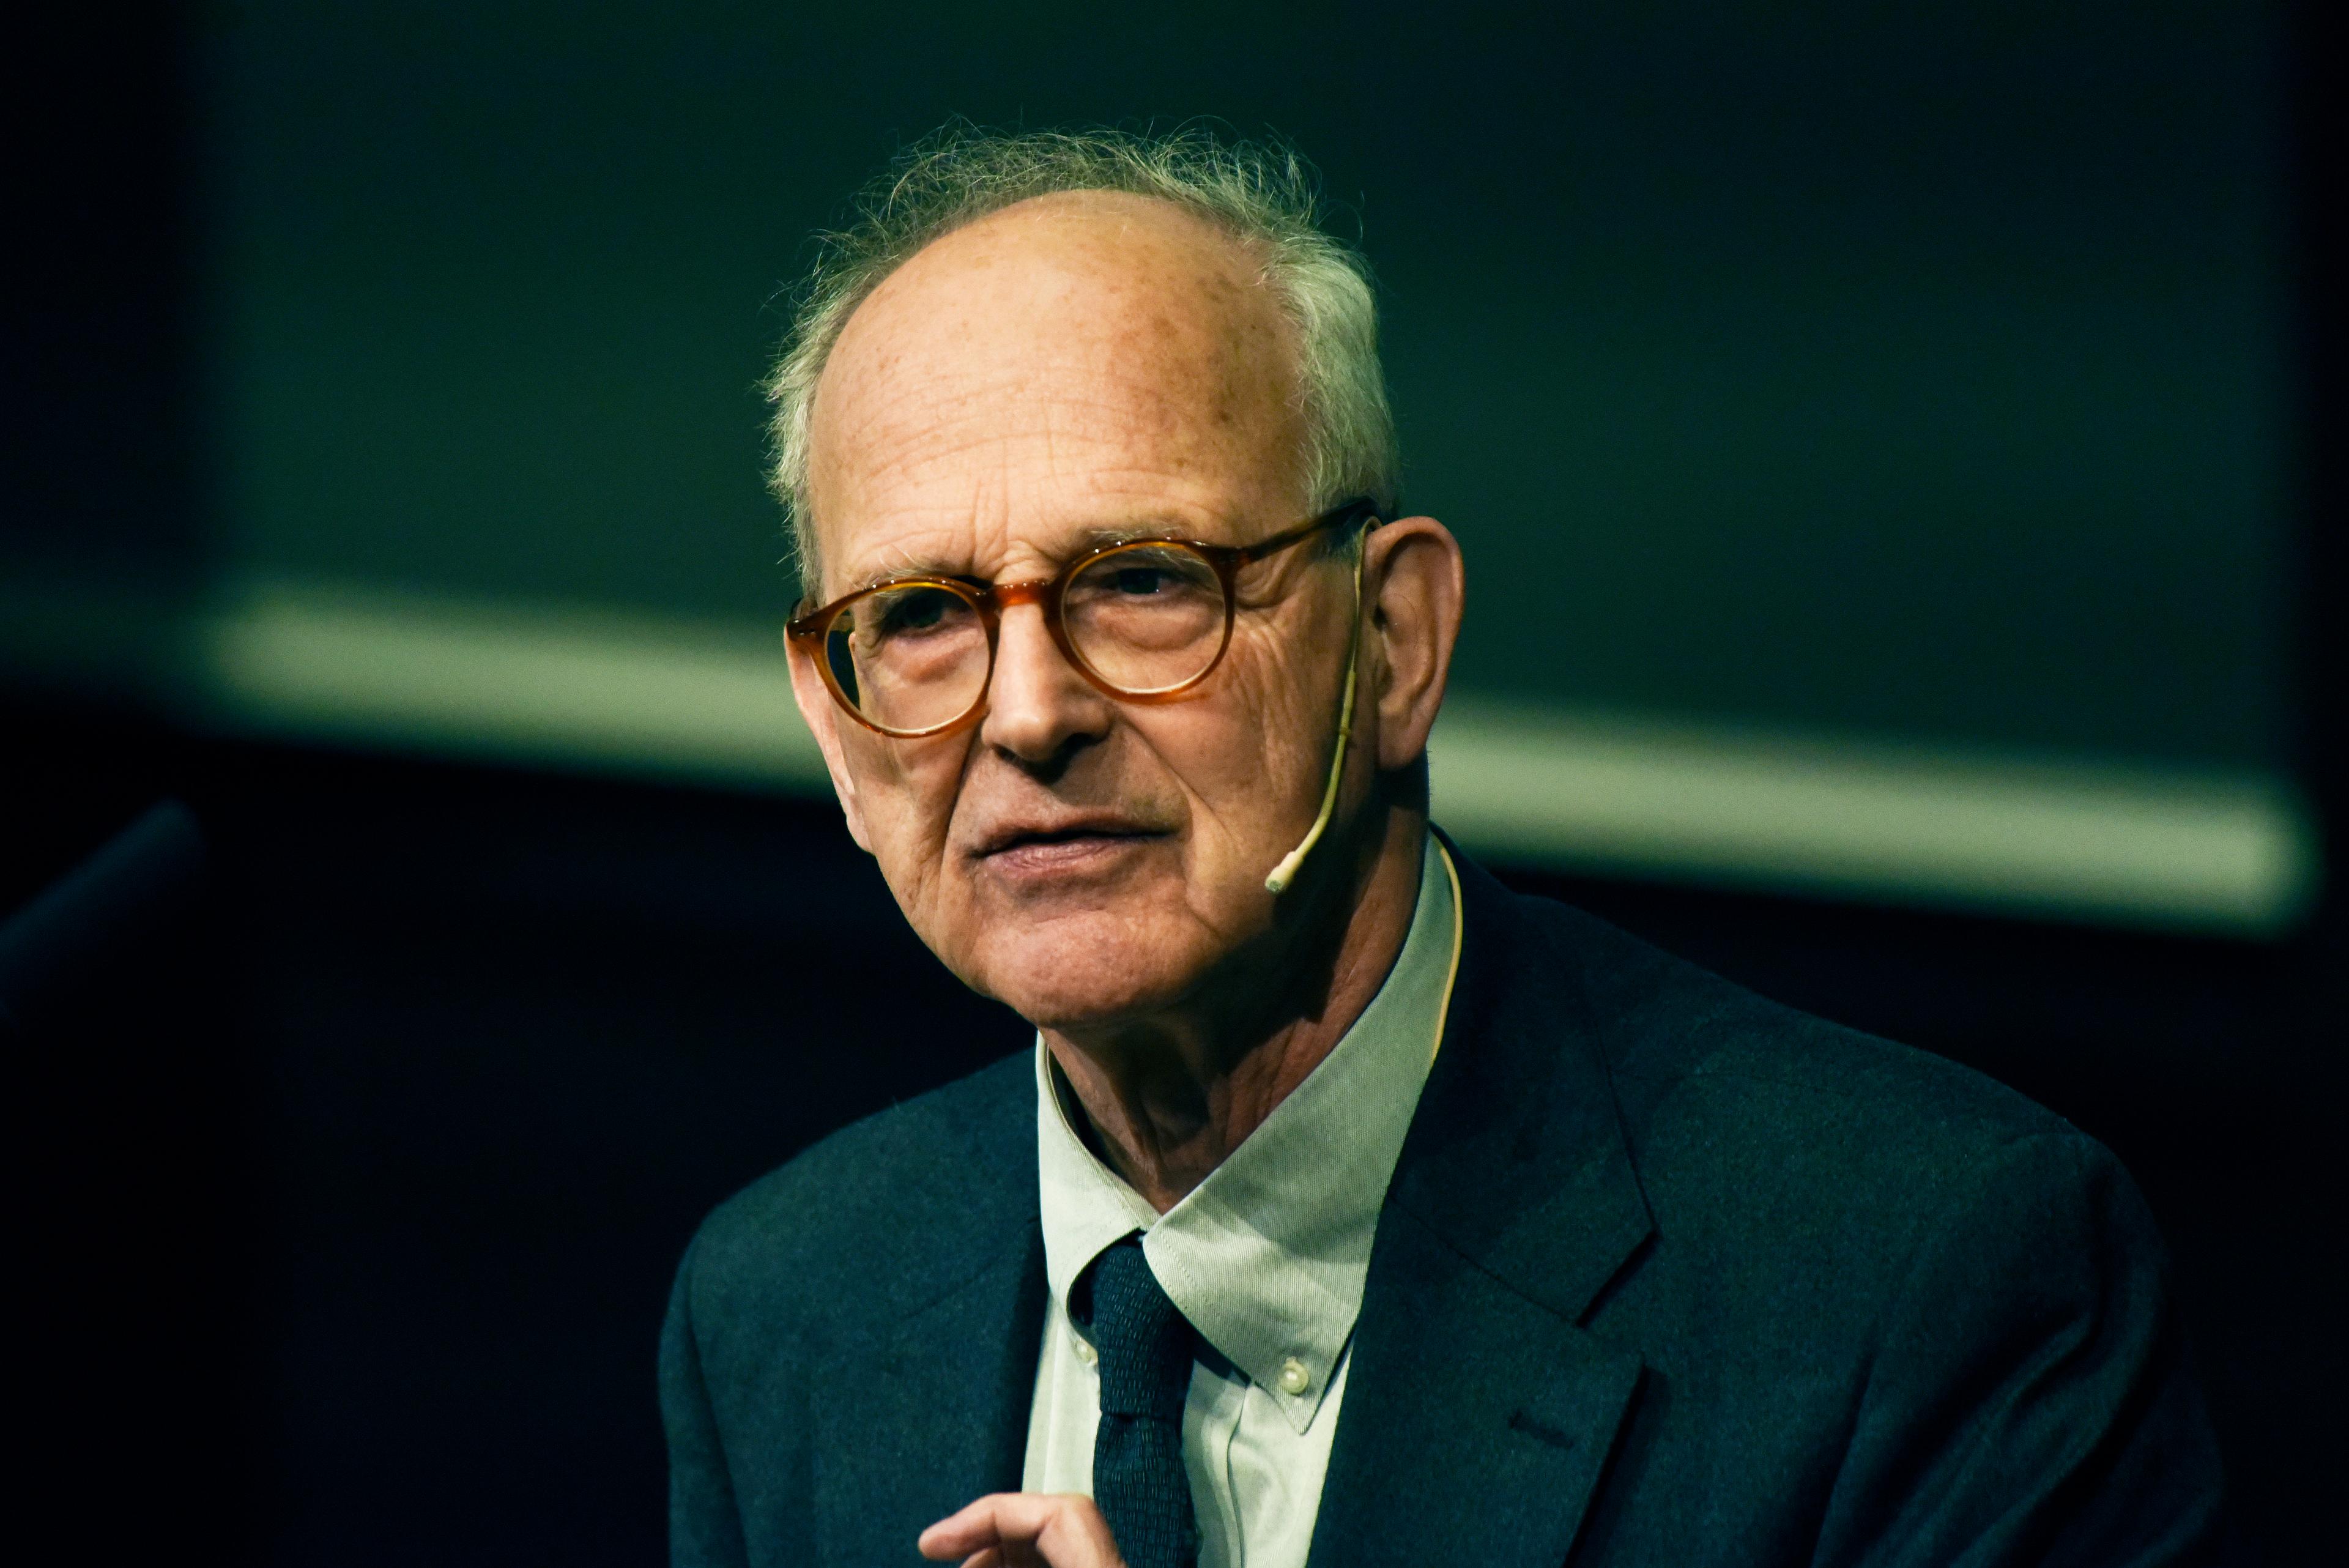 Rainer Weiss holding a lecture during the 2016 Kavli Prize week in Oslo